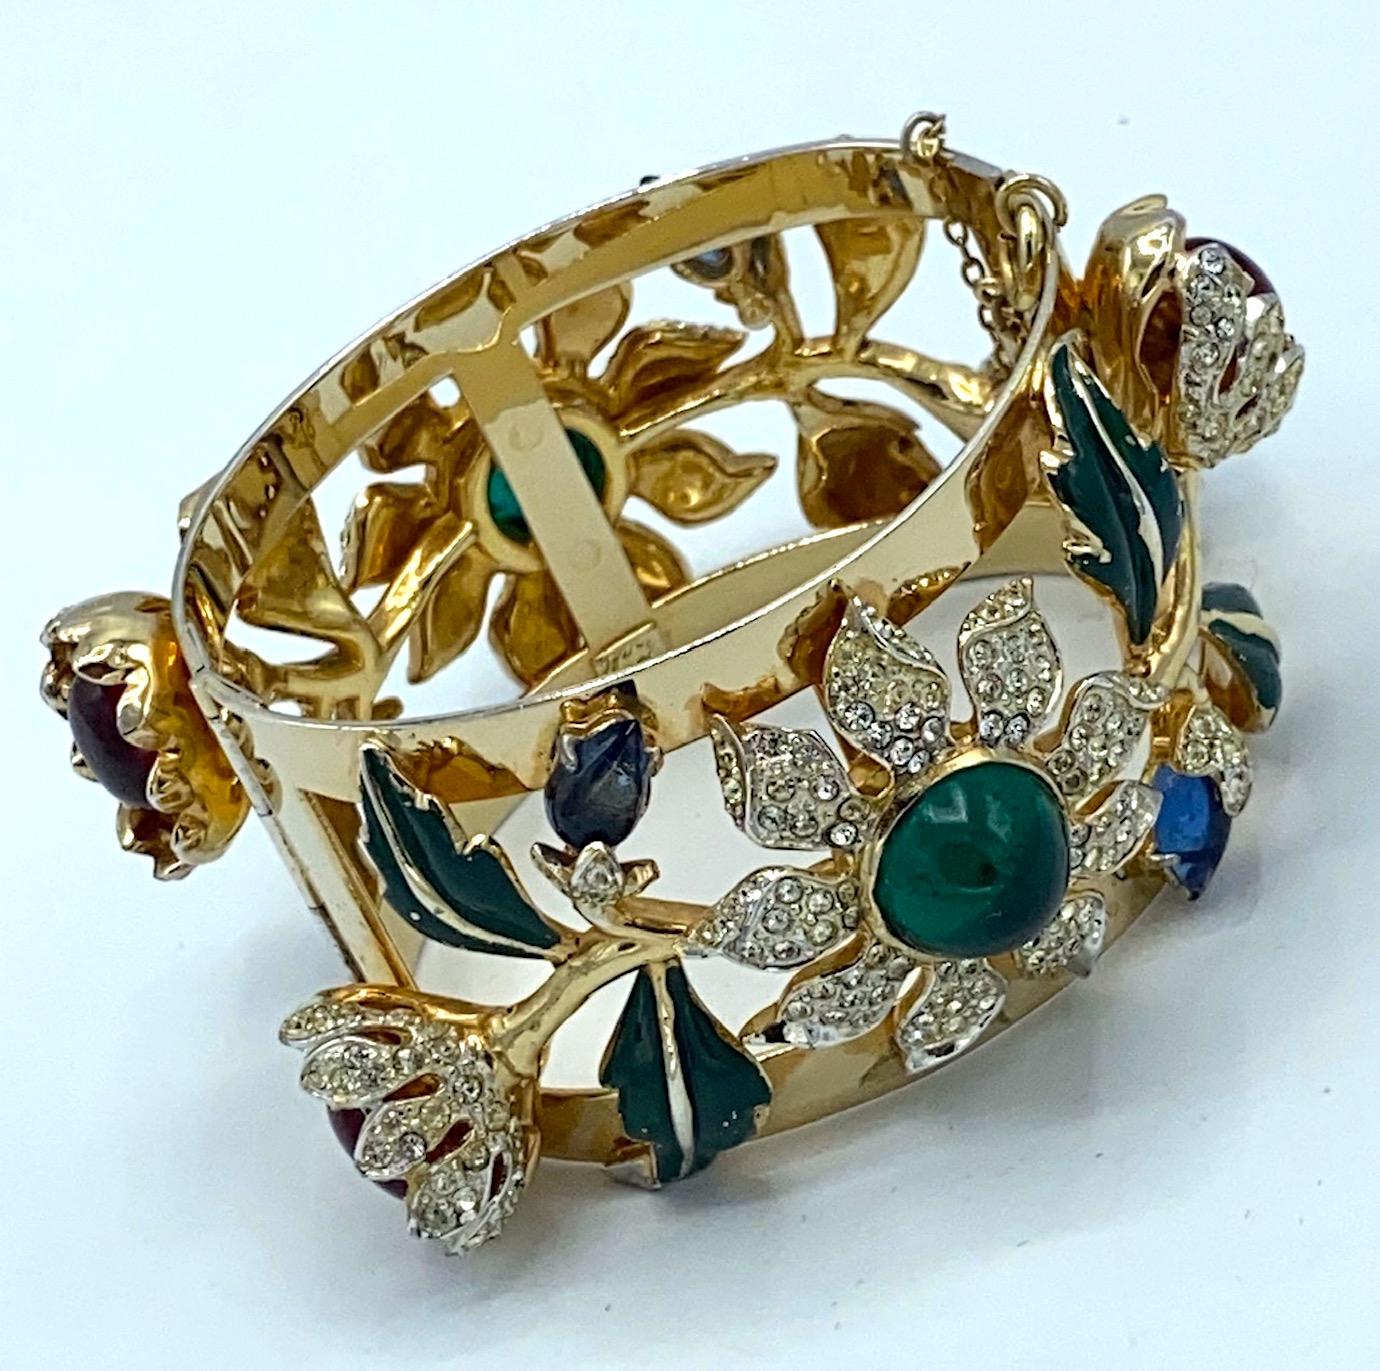 Presented here is the truly stunning and extremely desirable Camellia cuff racelet by American fashion jewelry company Coro. It has become known as the Carmen Miranda bracelet as she wears two of them in the 1948 film 